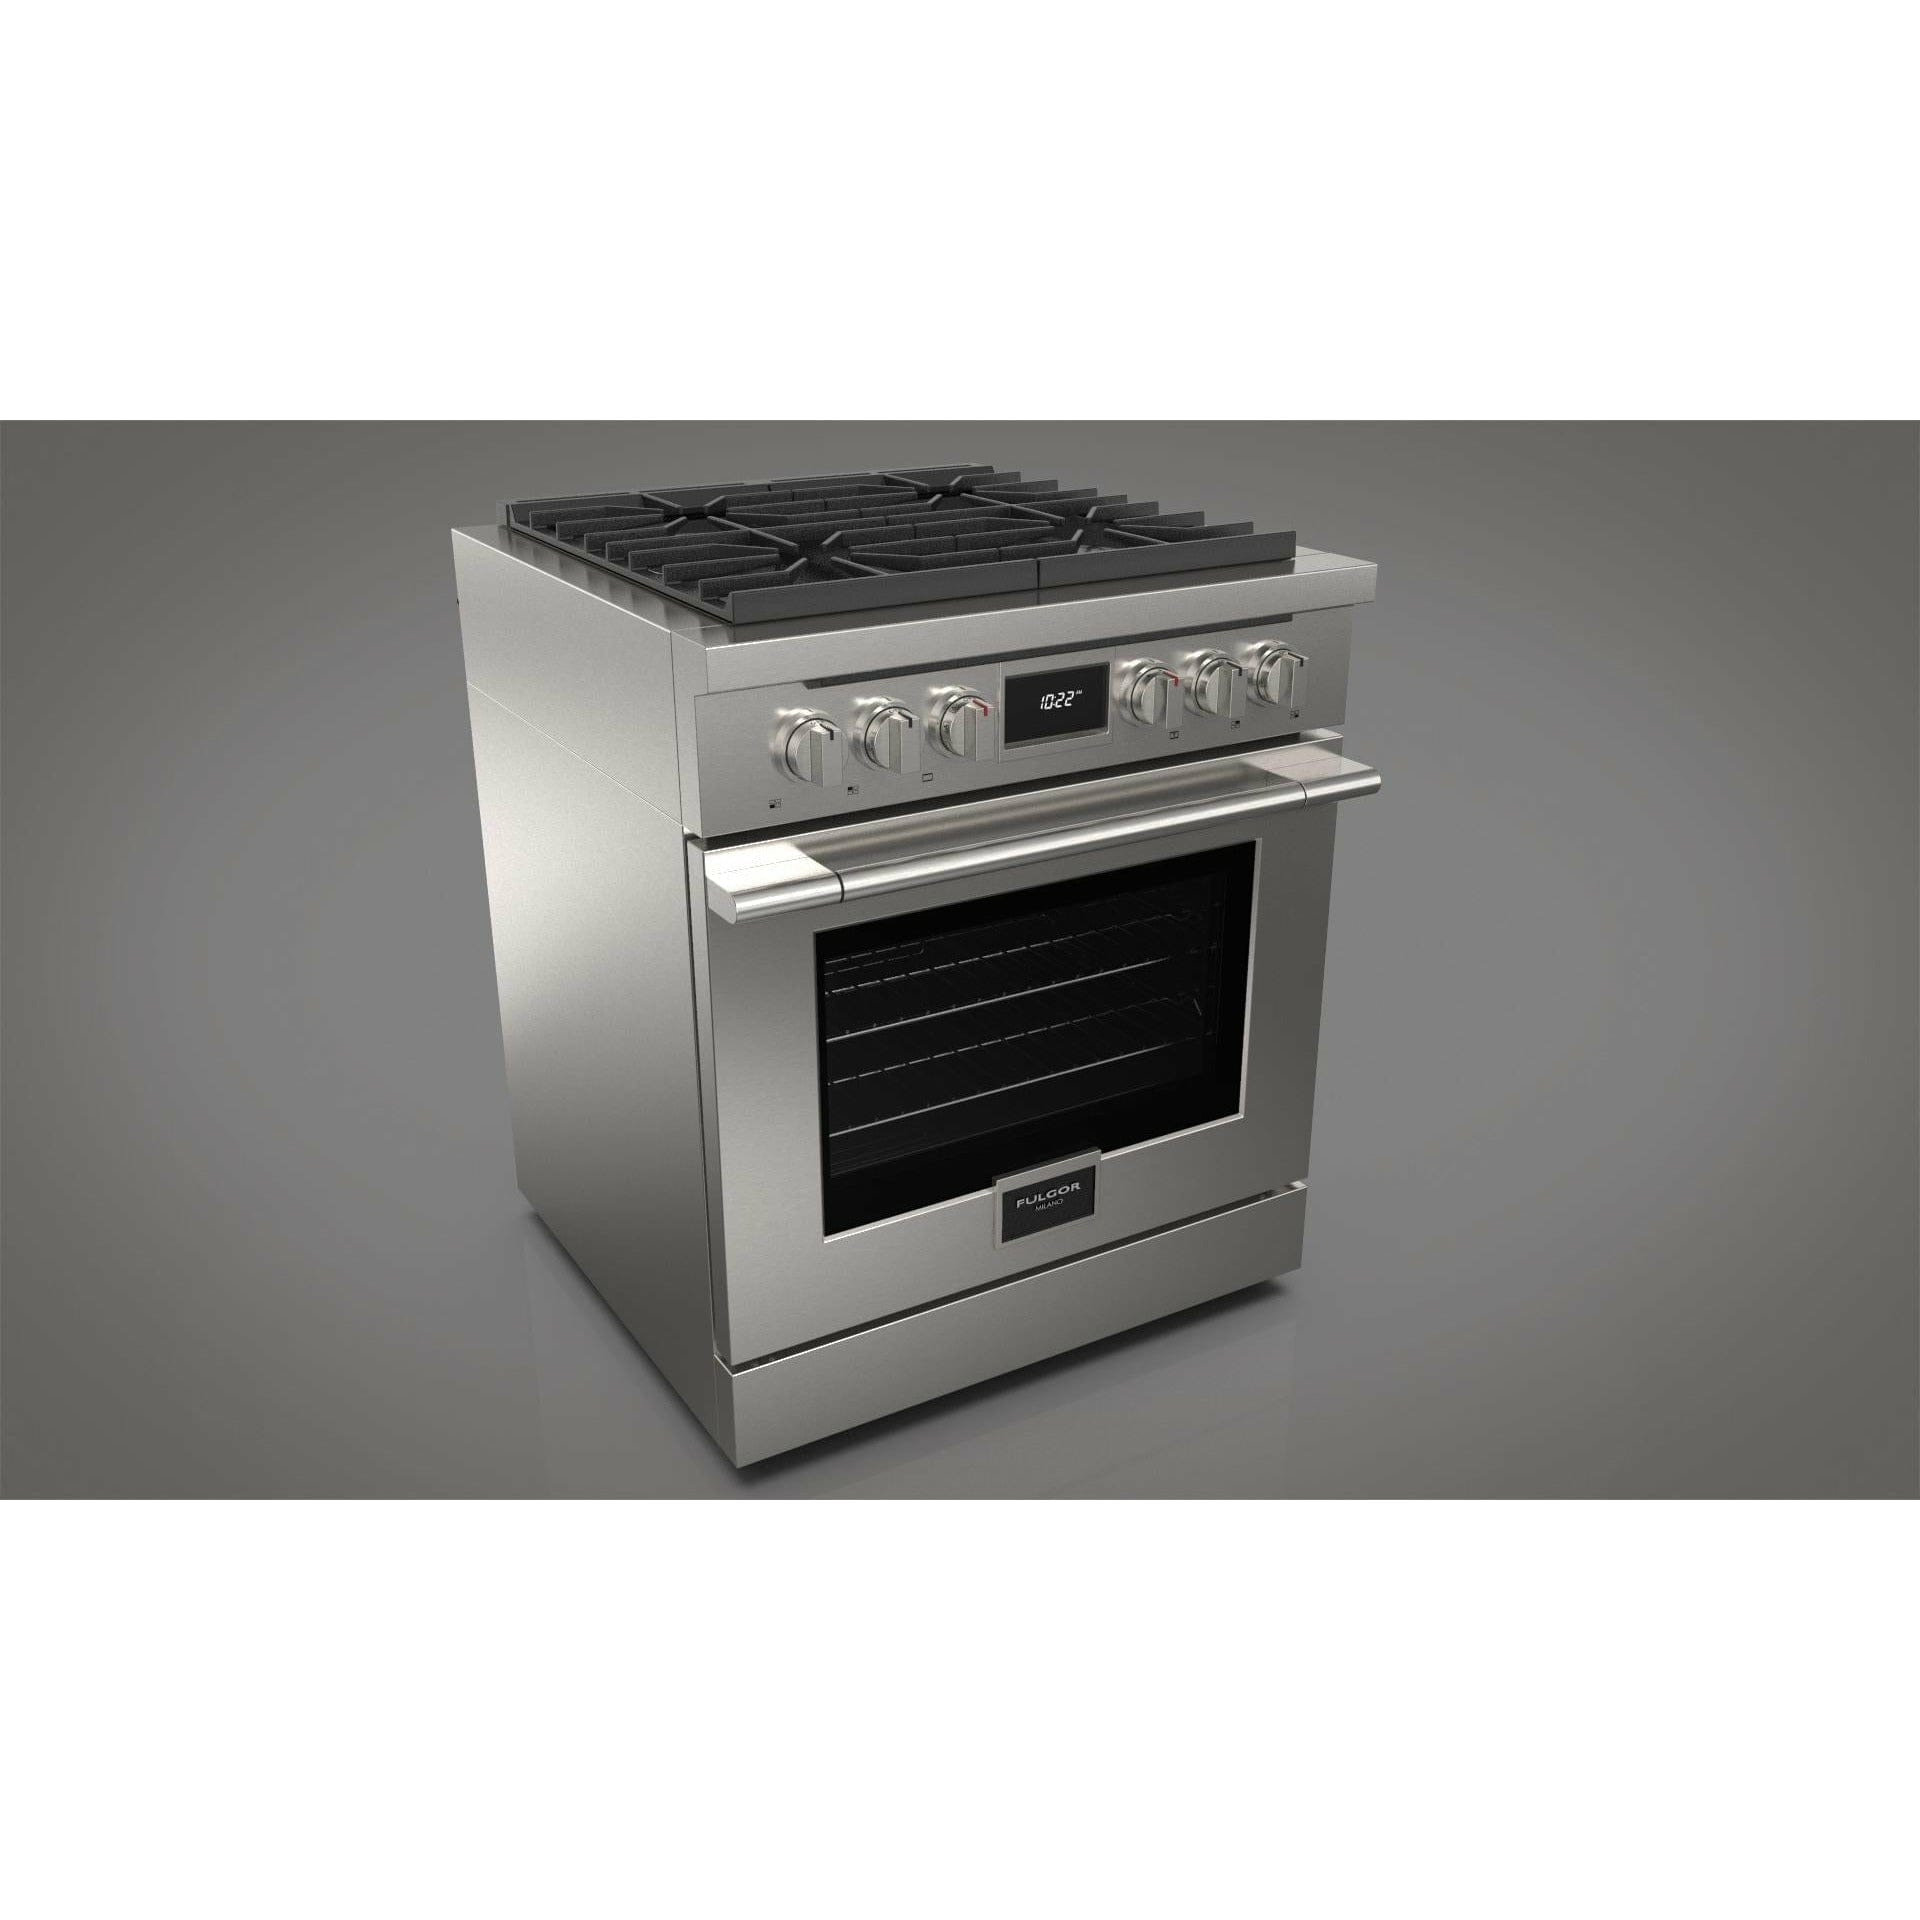 Fulgor Milano 30" Pro-Style Dual Fuel Range with 4 Sealed Burners,  4.4 Cu. Ft. Capacity w/  Stainless Steel - F4PDF304S1 Ranges Luxury Appliances Direct